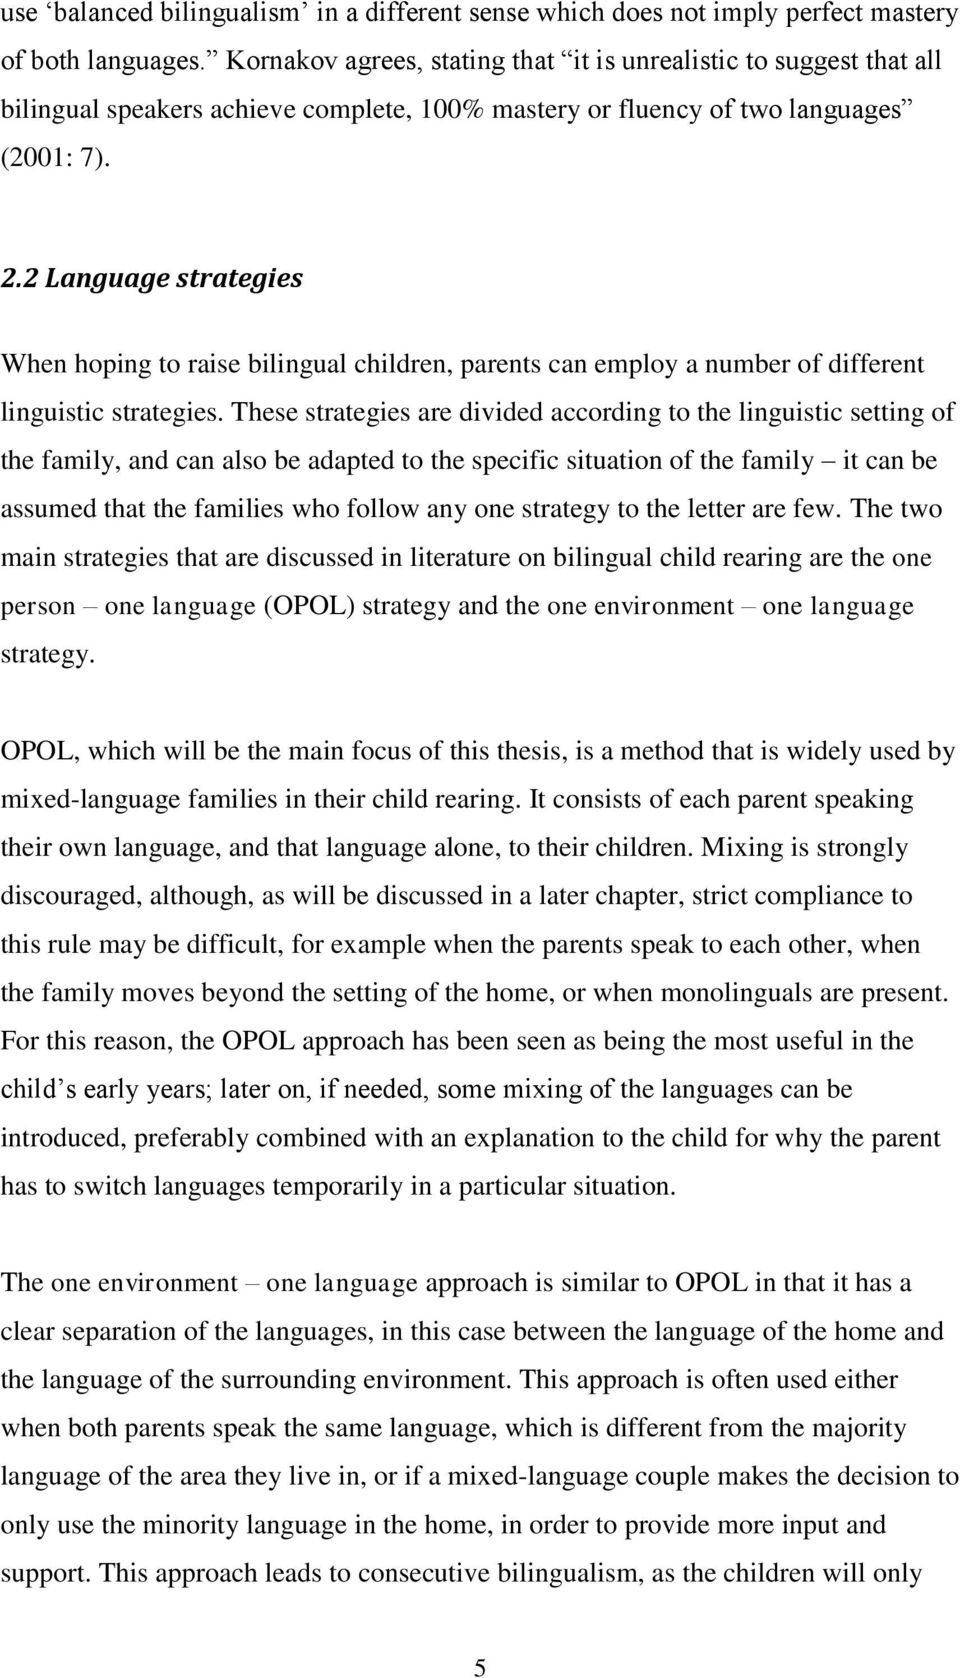 2 Language strategies When hoping to raise bilingual children, parents can employ a number of different linguistic strategies.